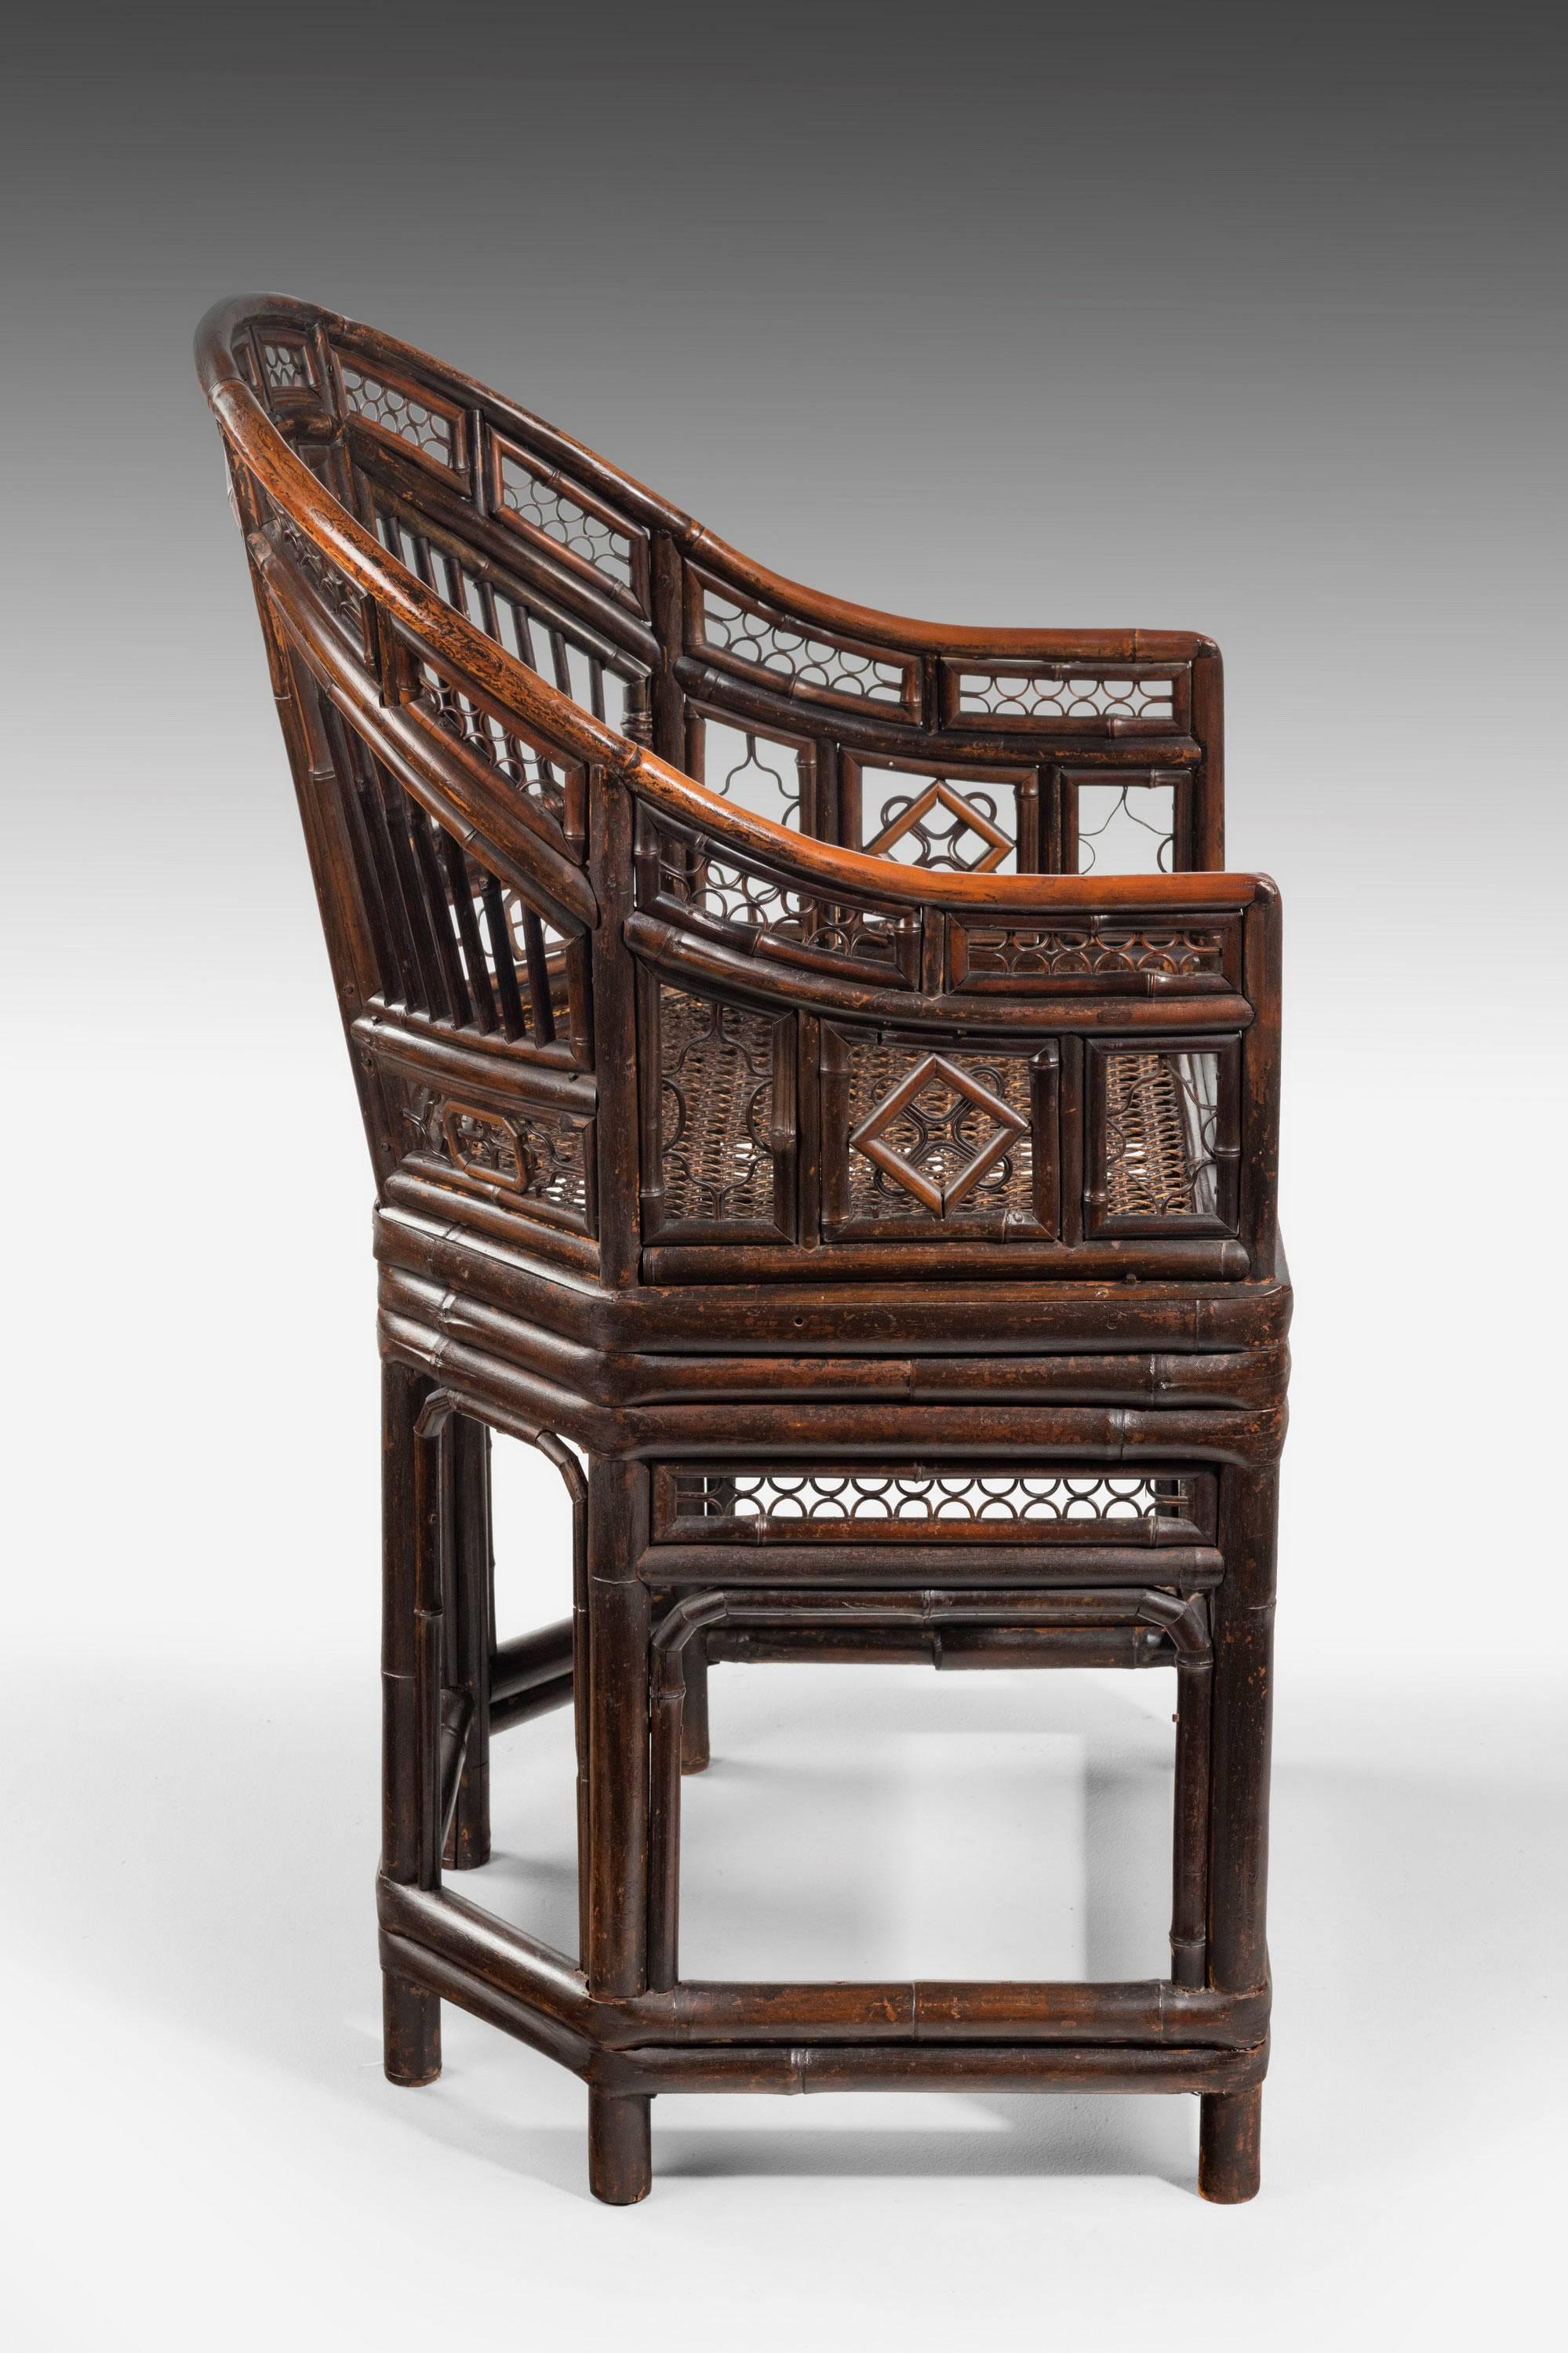 A most attractive Regency period pavilion cane armchair, with elaborate work all in excellent condition. Retaining the original cane work seat.